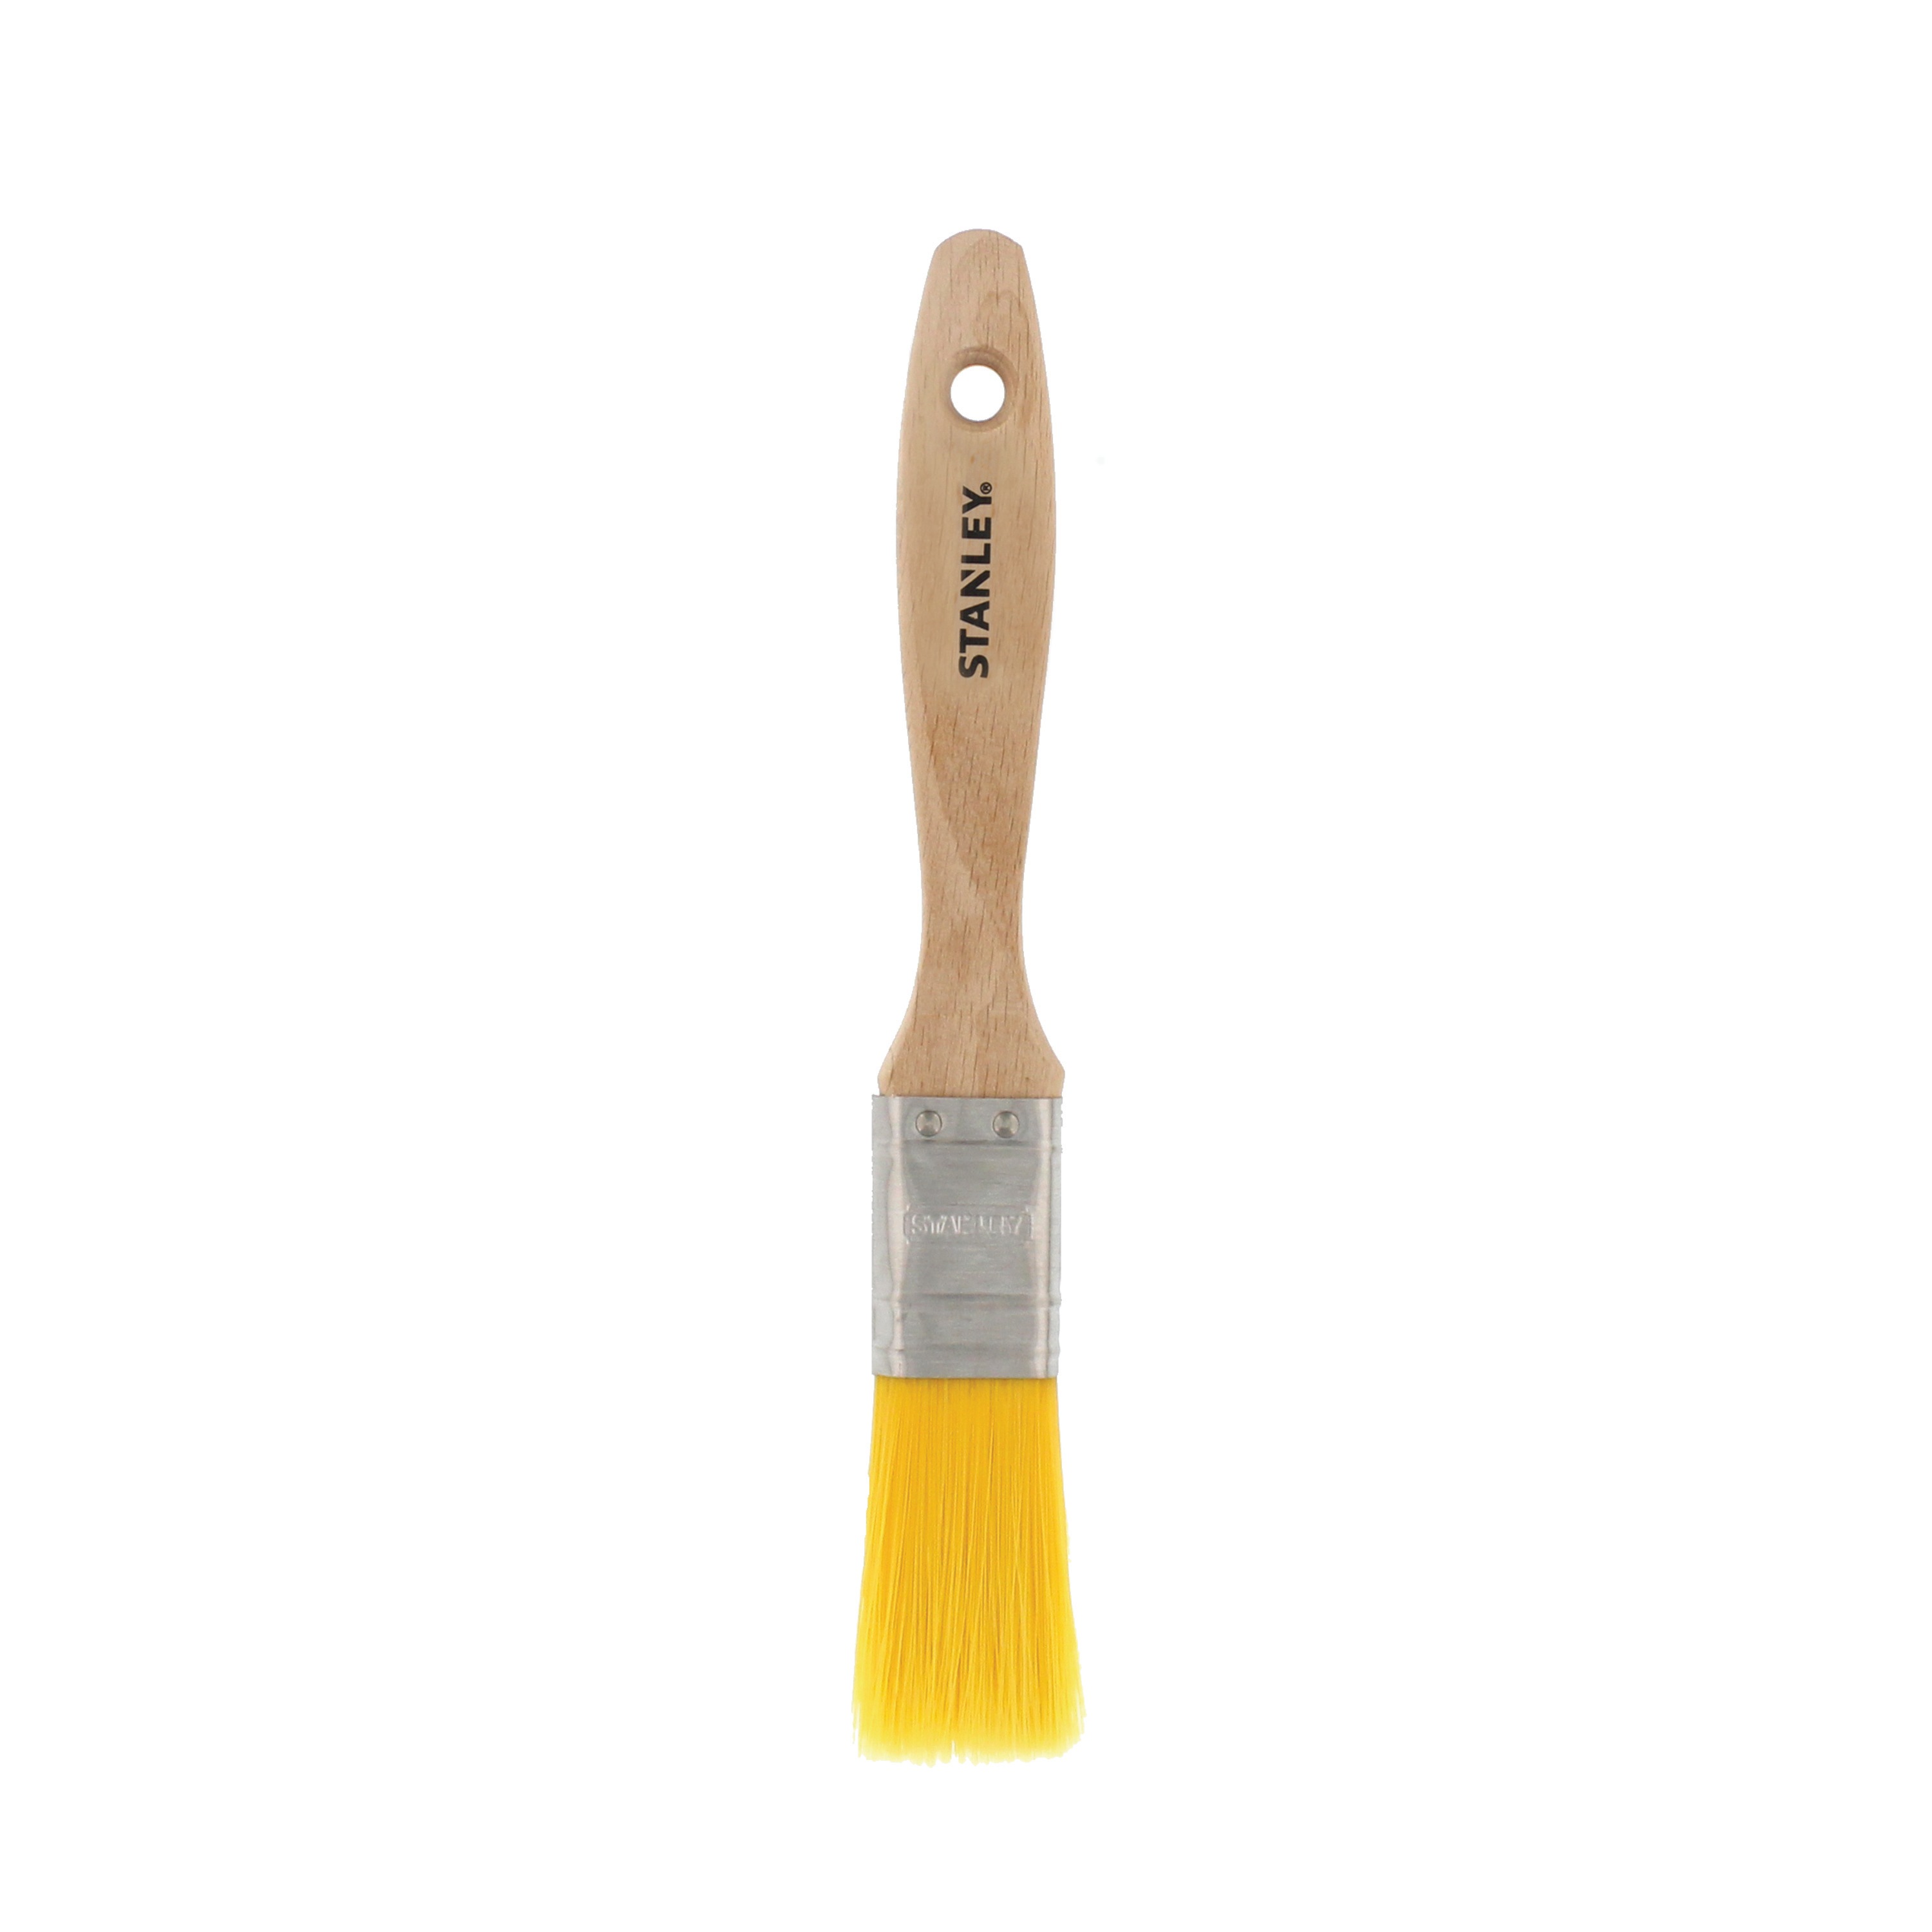 Stanley Tools - 1 in FATMAX PBT Flat Paint Brush - BPST02531